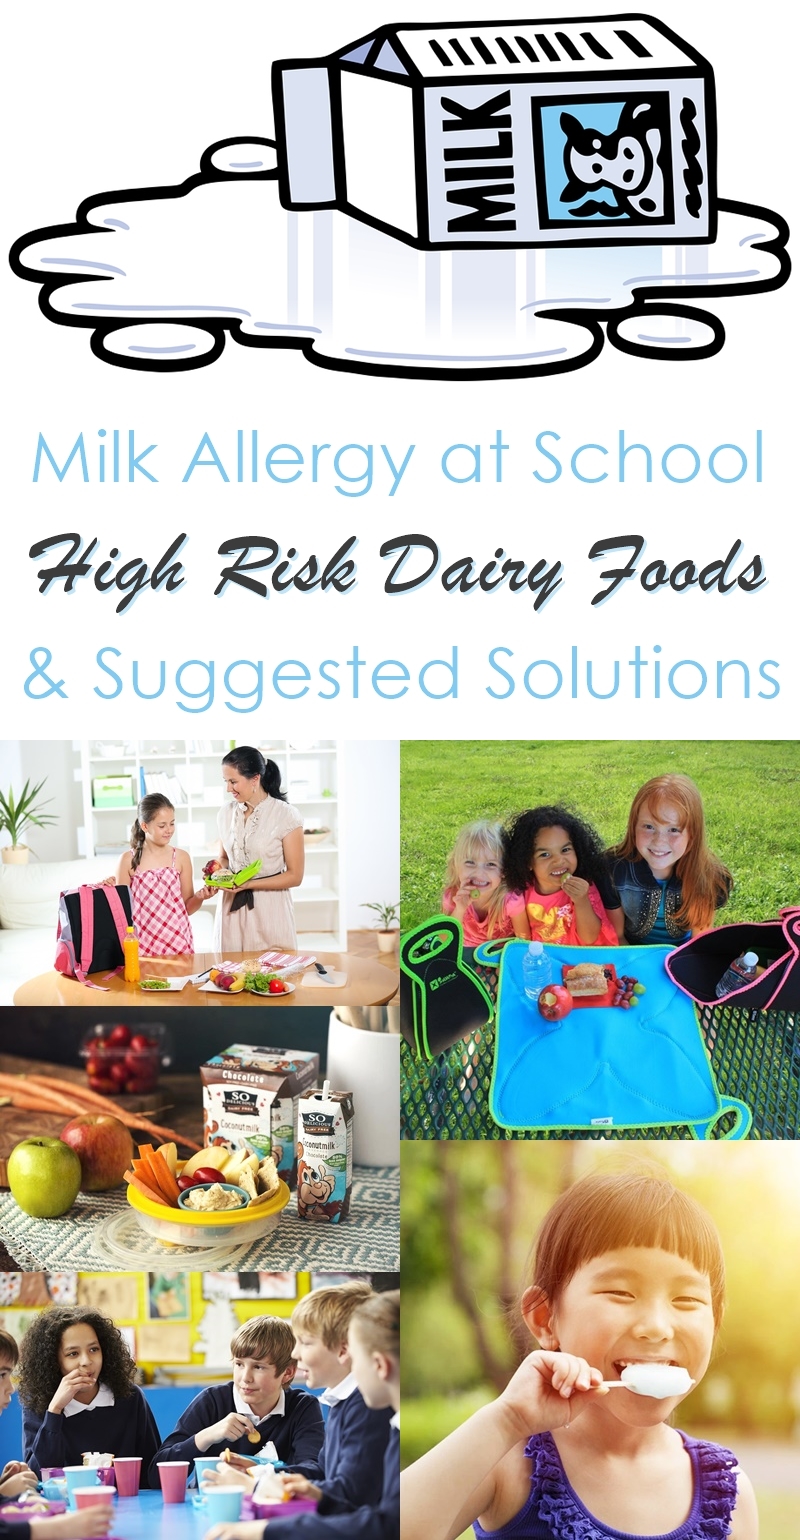 Suggested Solutions for Avoiding High Risk Dairy Foods at School (for Milk Allergies)